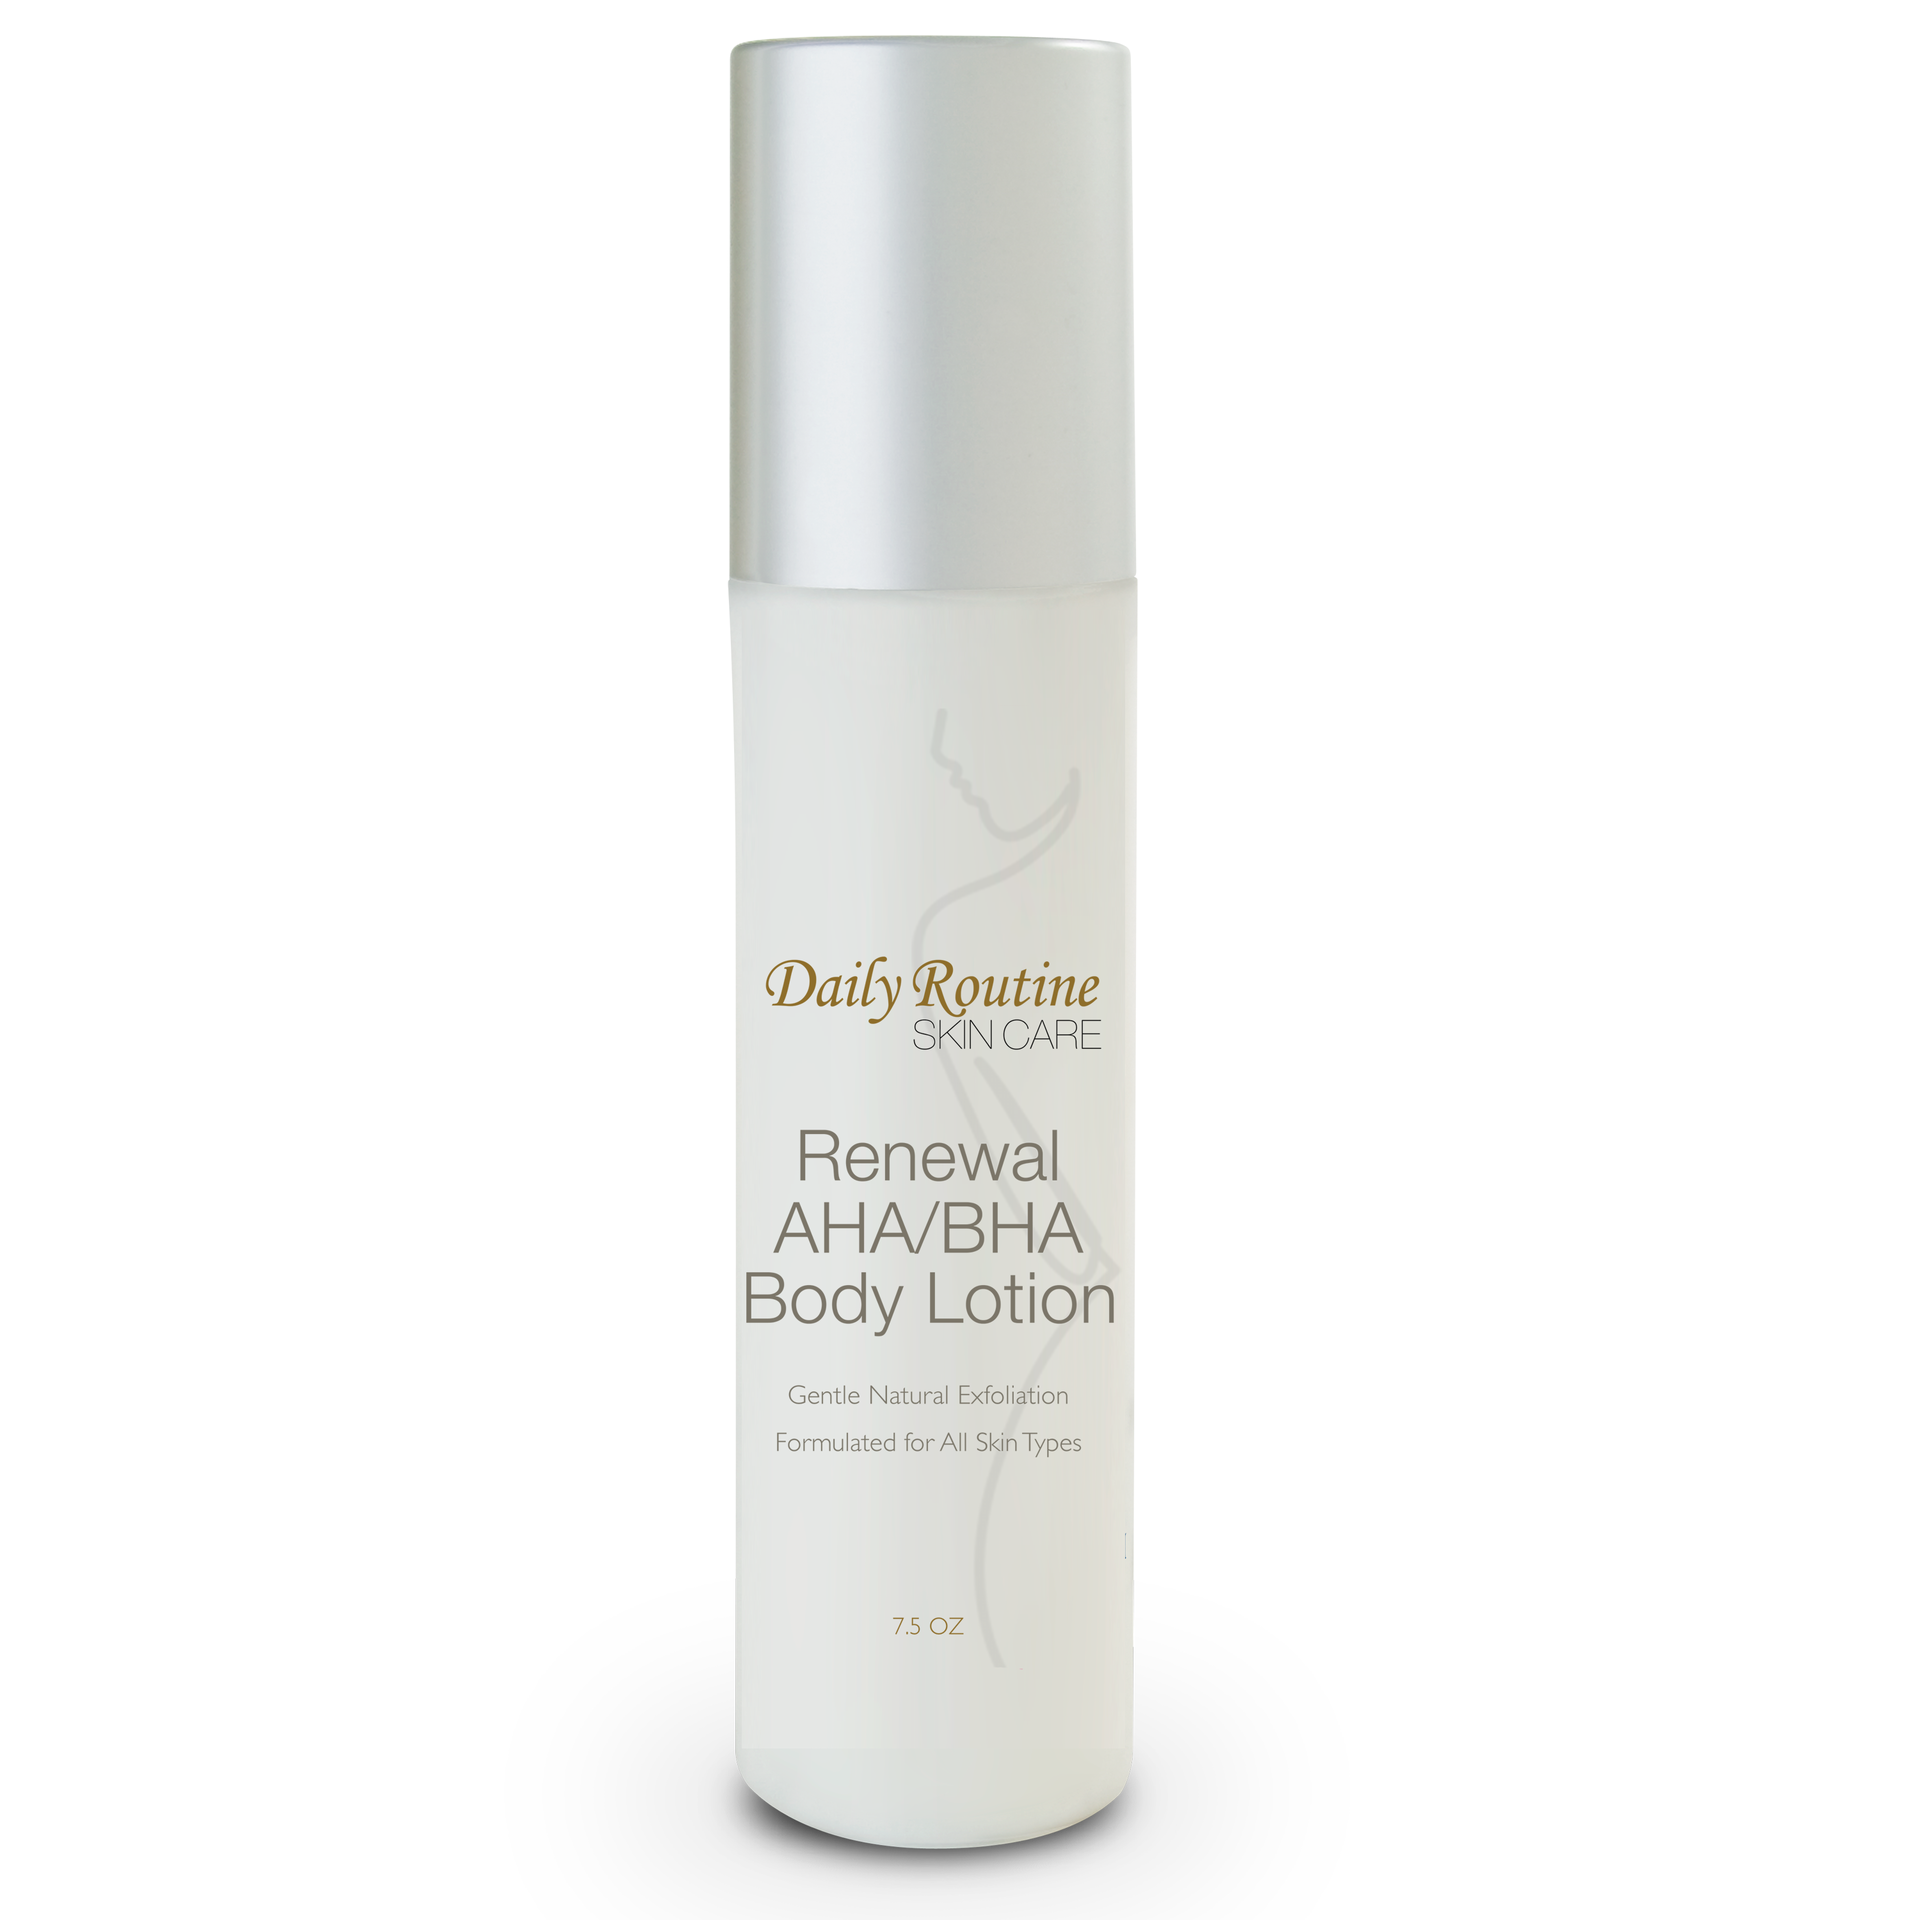 AHA/BHA Body Lotion by Daily Routine Skin Care